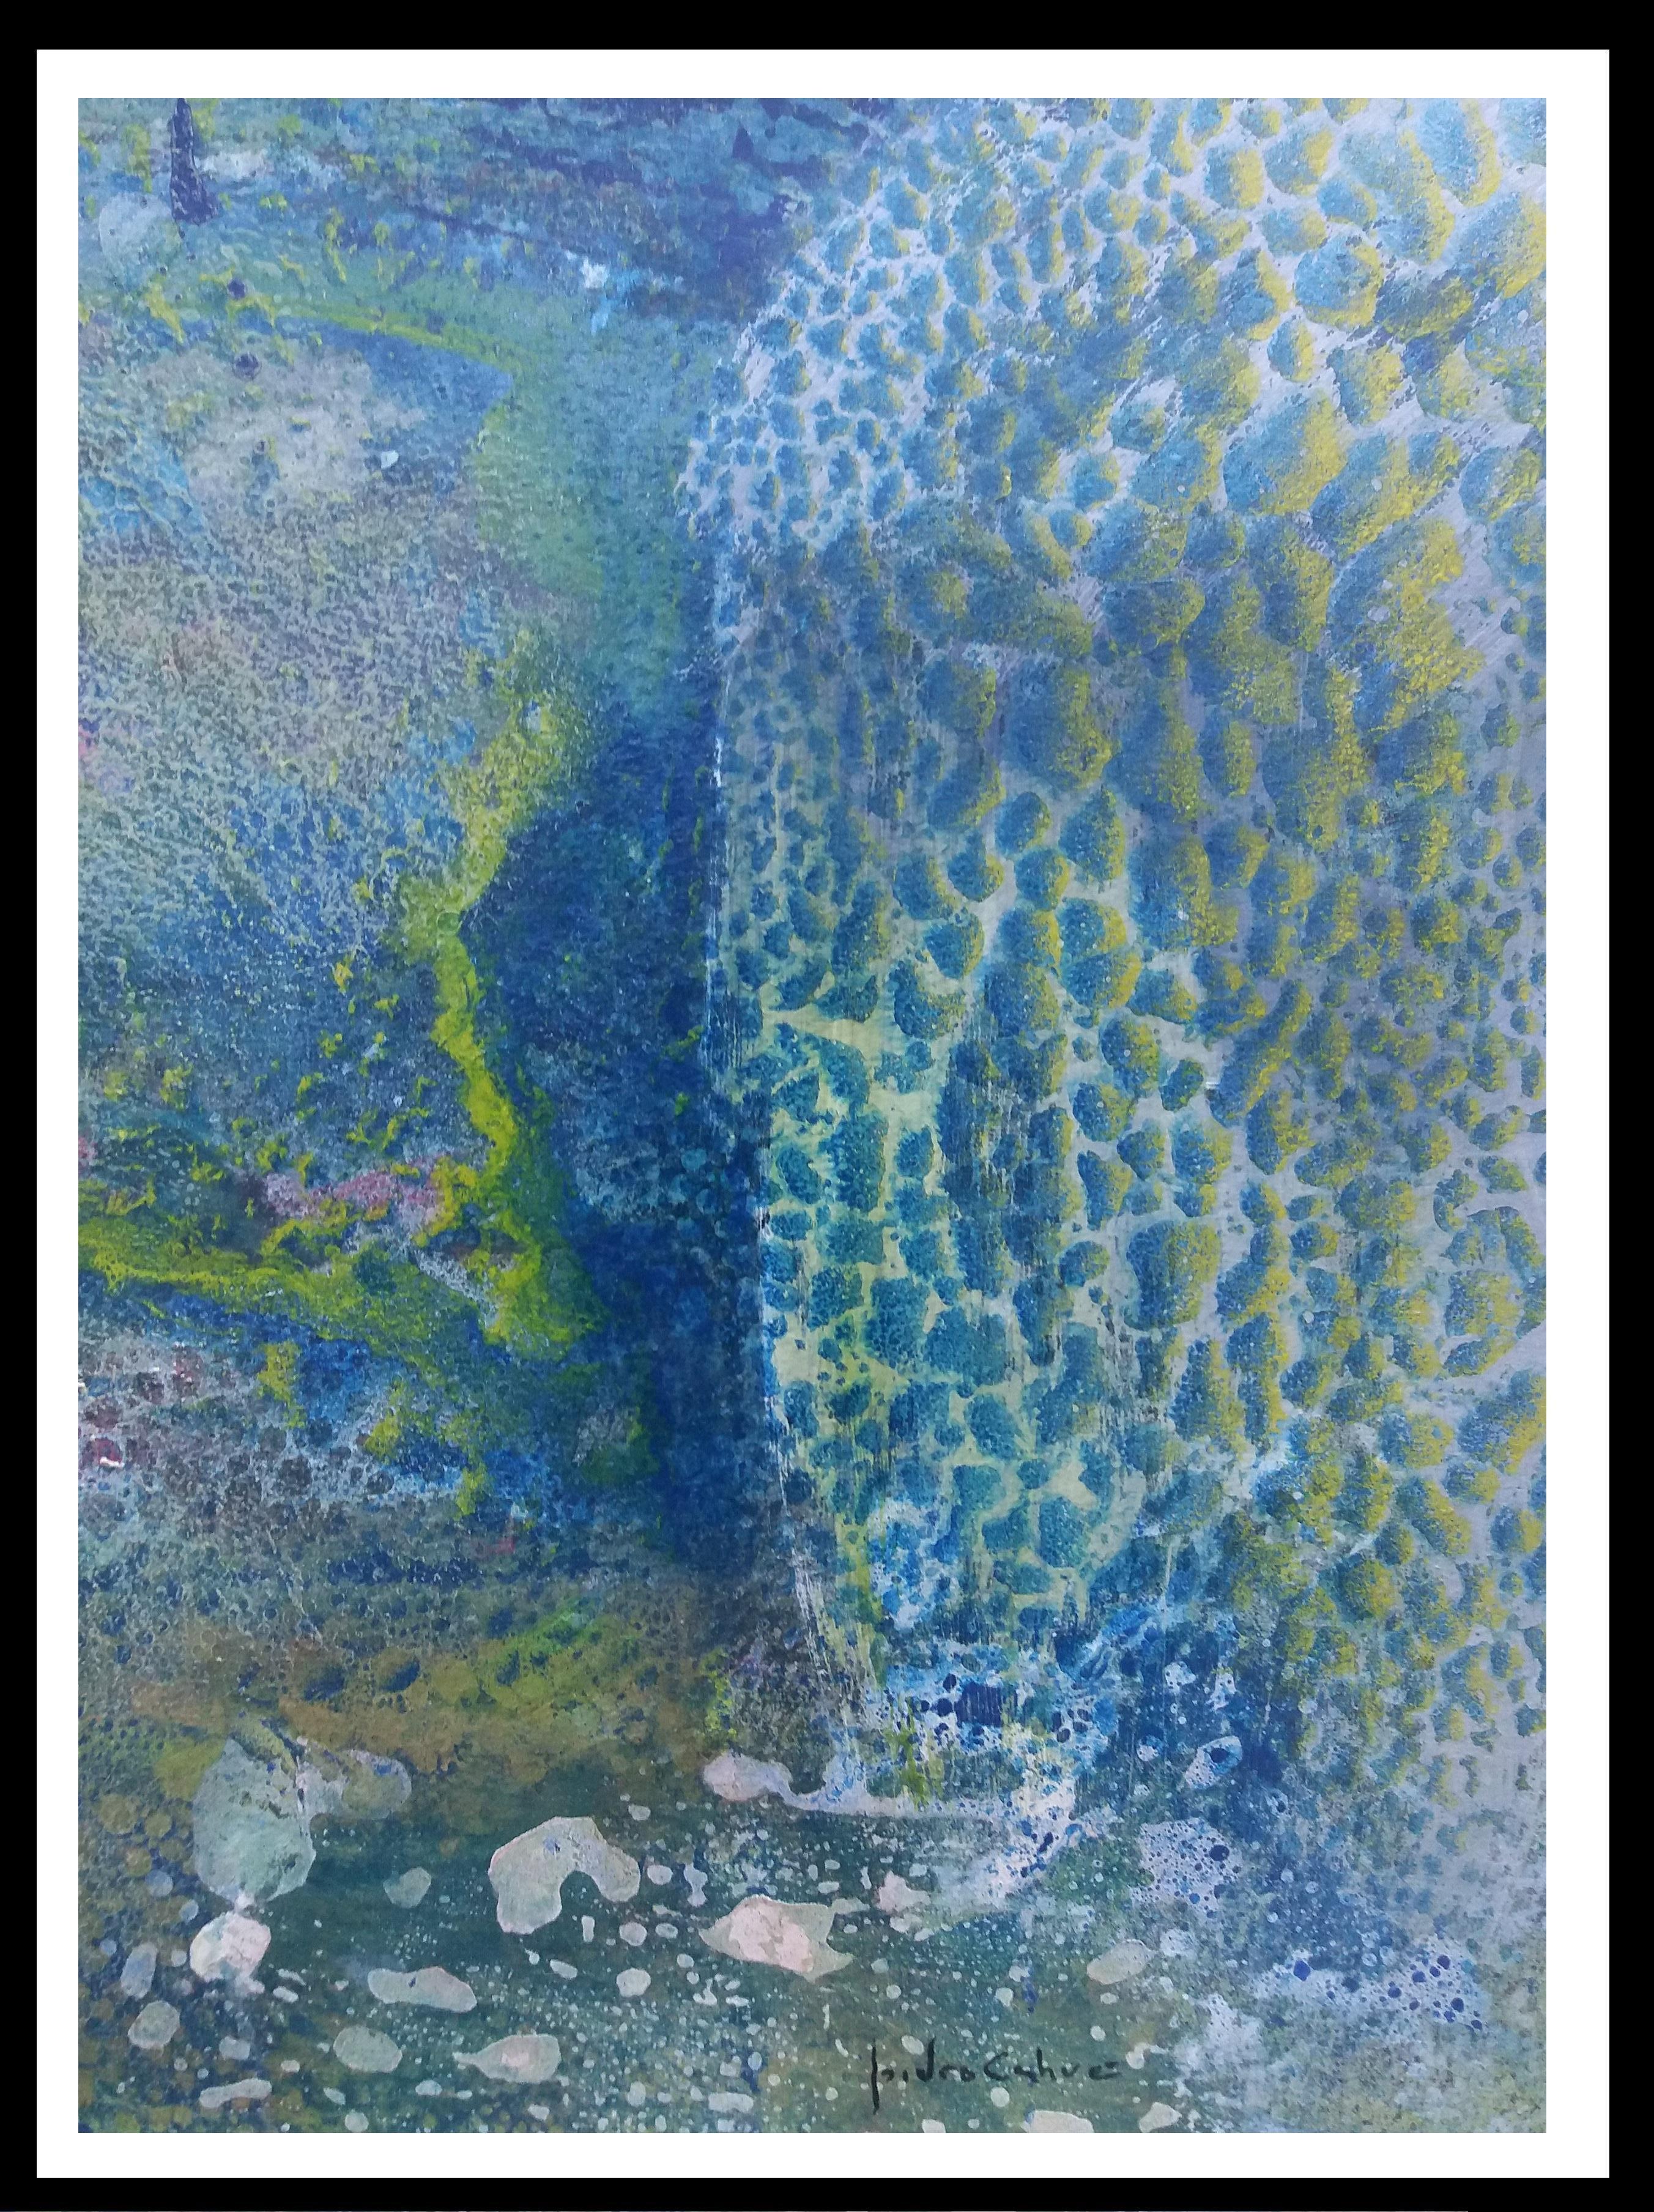 Isidro Cahue Abstract Painting -  I. Cahue  Vertical  Blue Drops Effect    original  acrylic paper painting